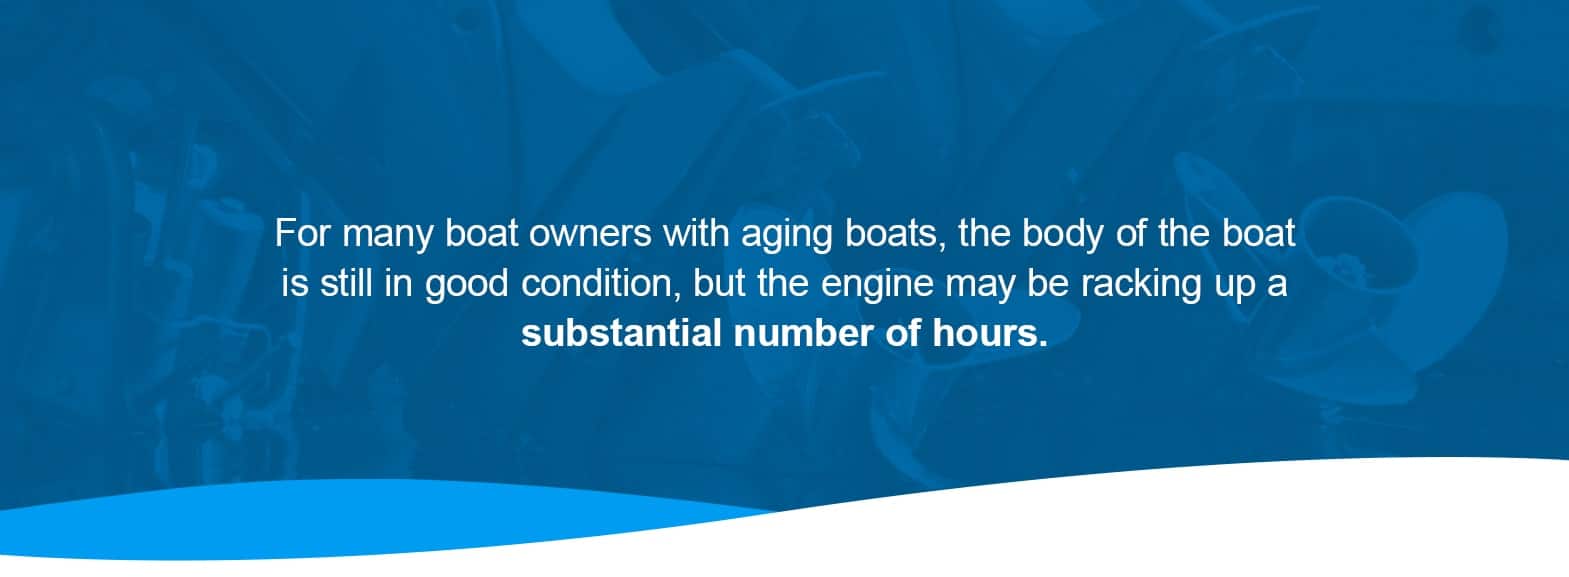 Should I Repower My Boat? For many boat owners with aging boats, the body of the boat is still in good condition, but the engine may be racking up a substantial number of hours. 